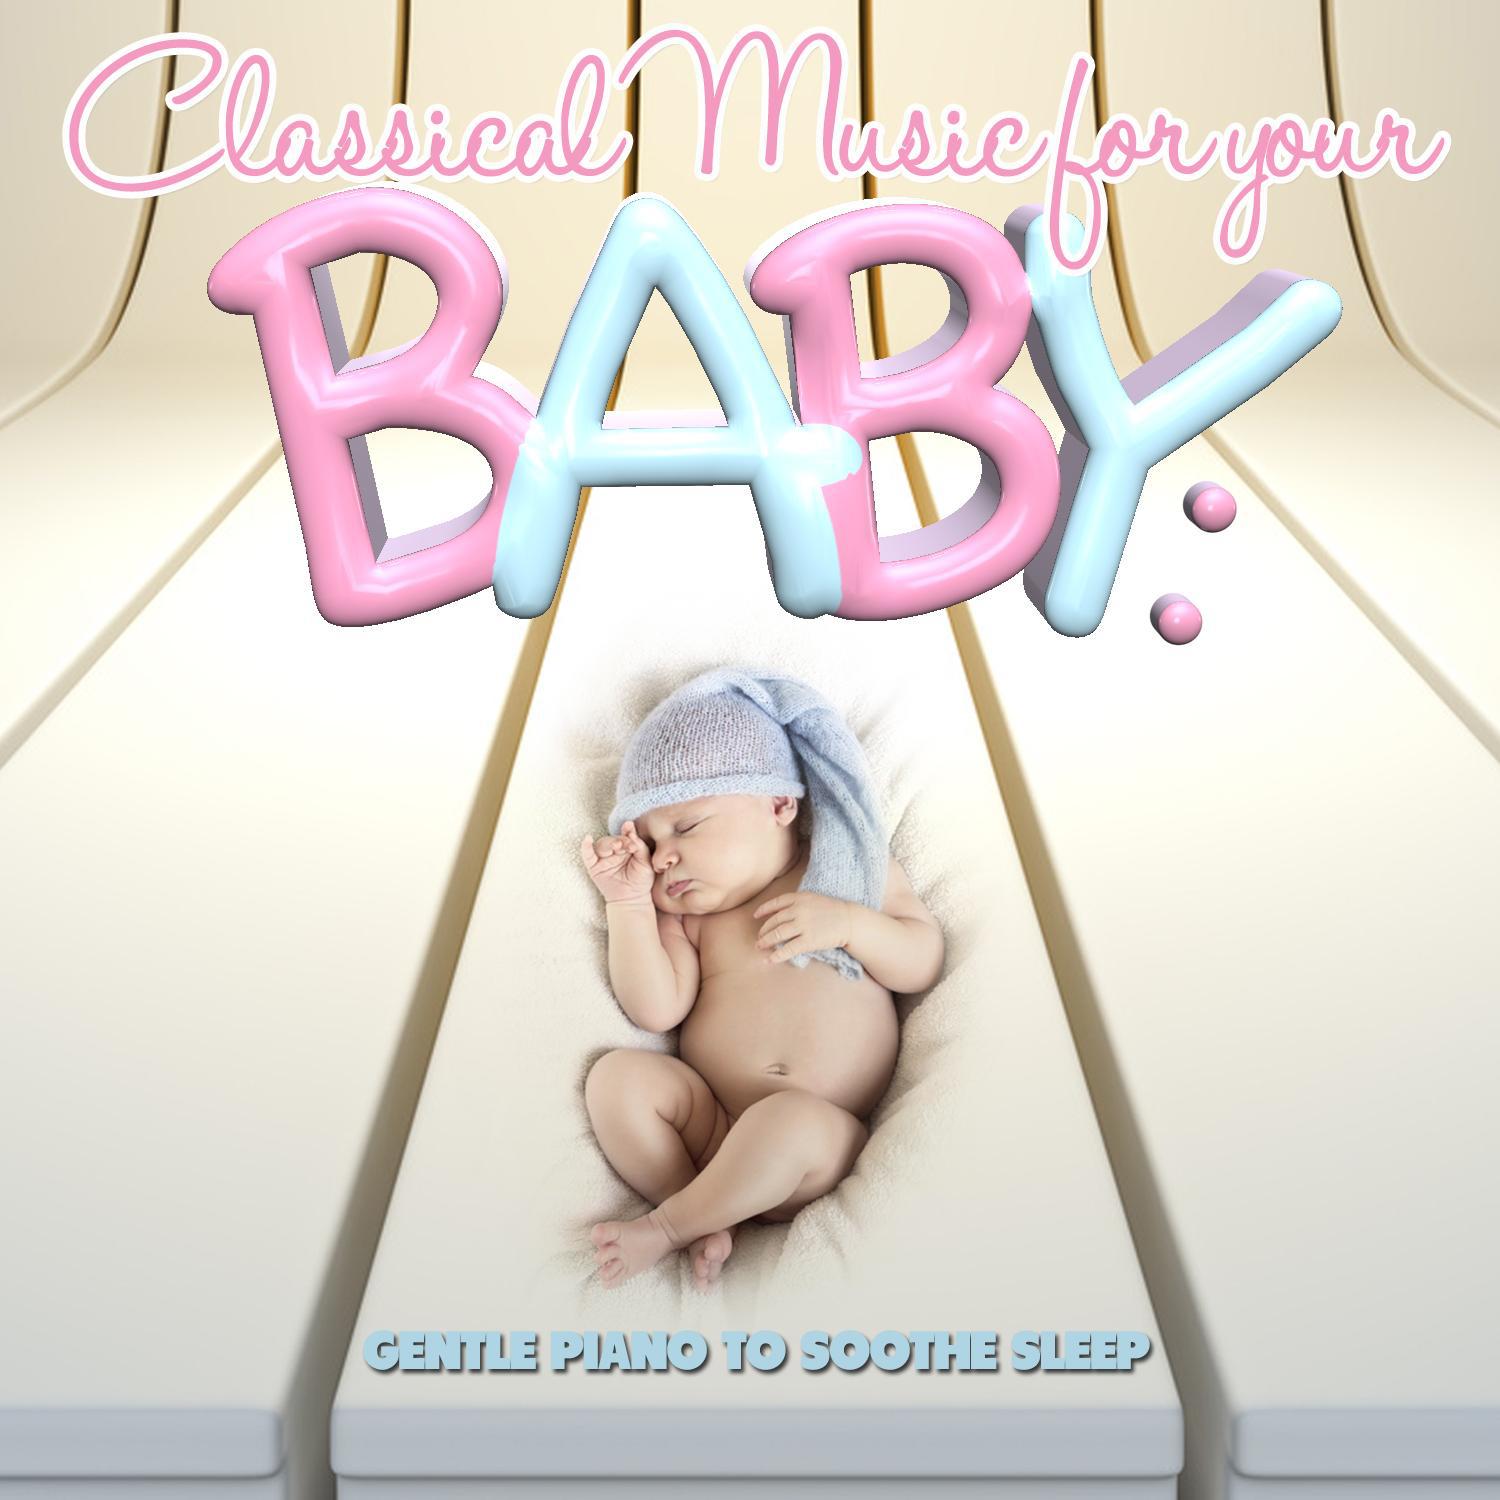 Classical Music for Your Baby: Gentle Piano to Soothe Sleep